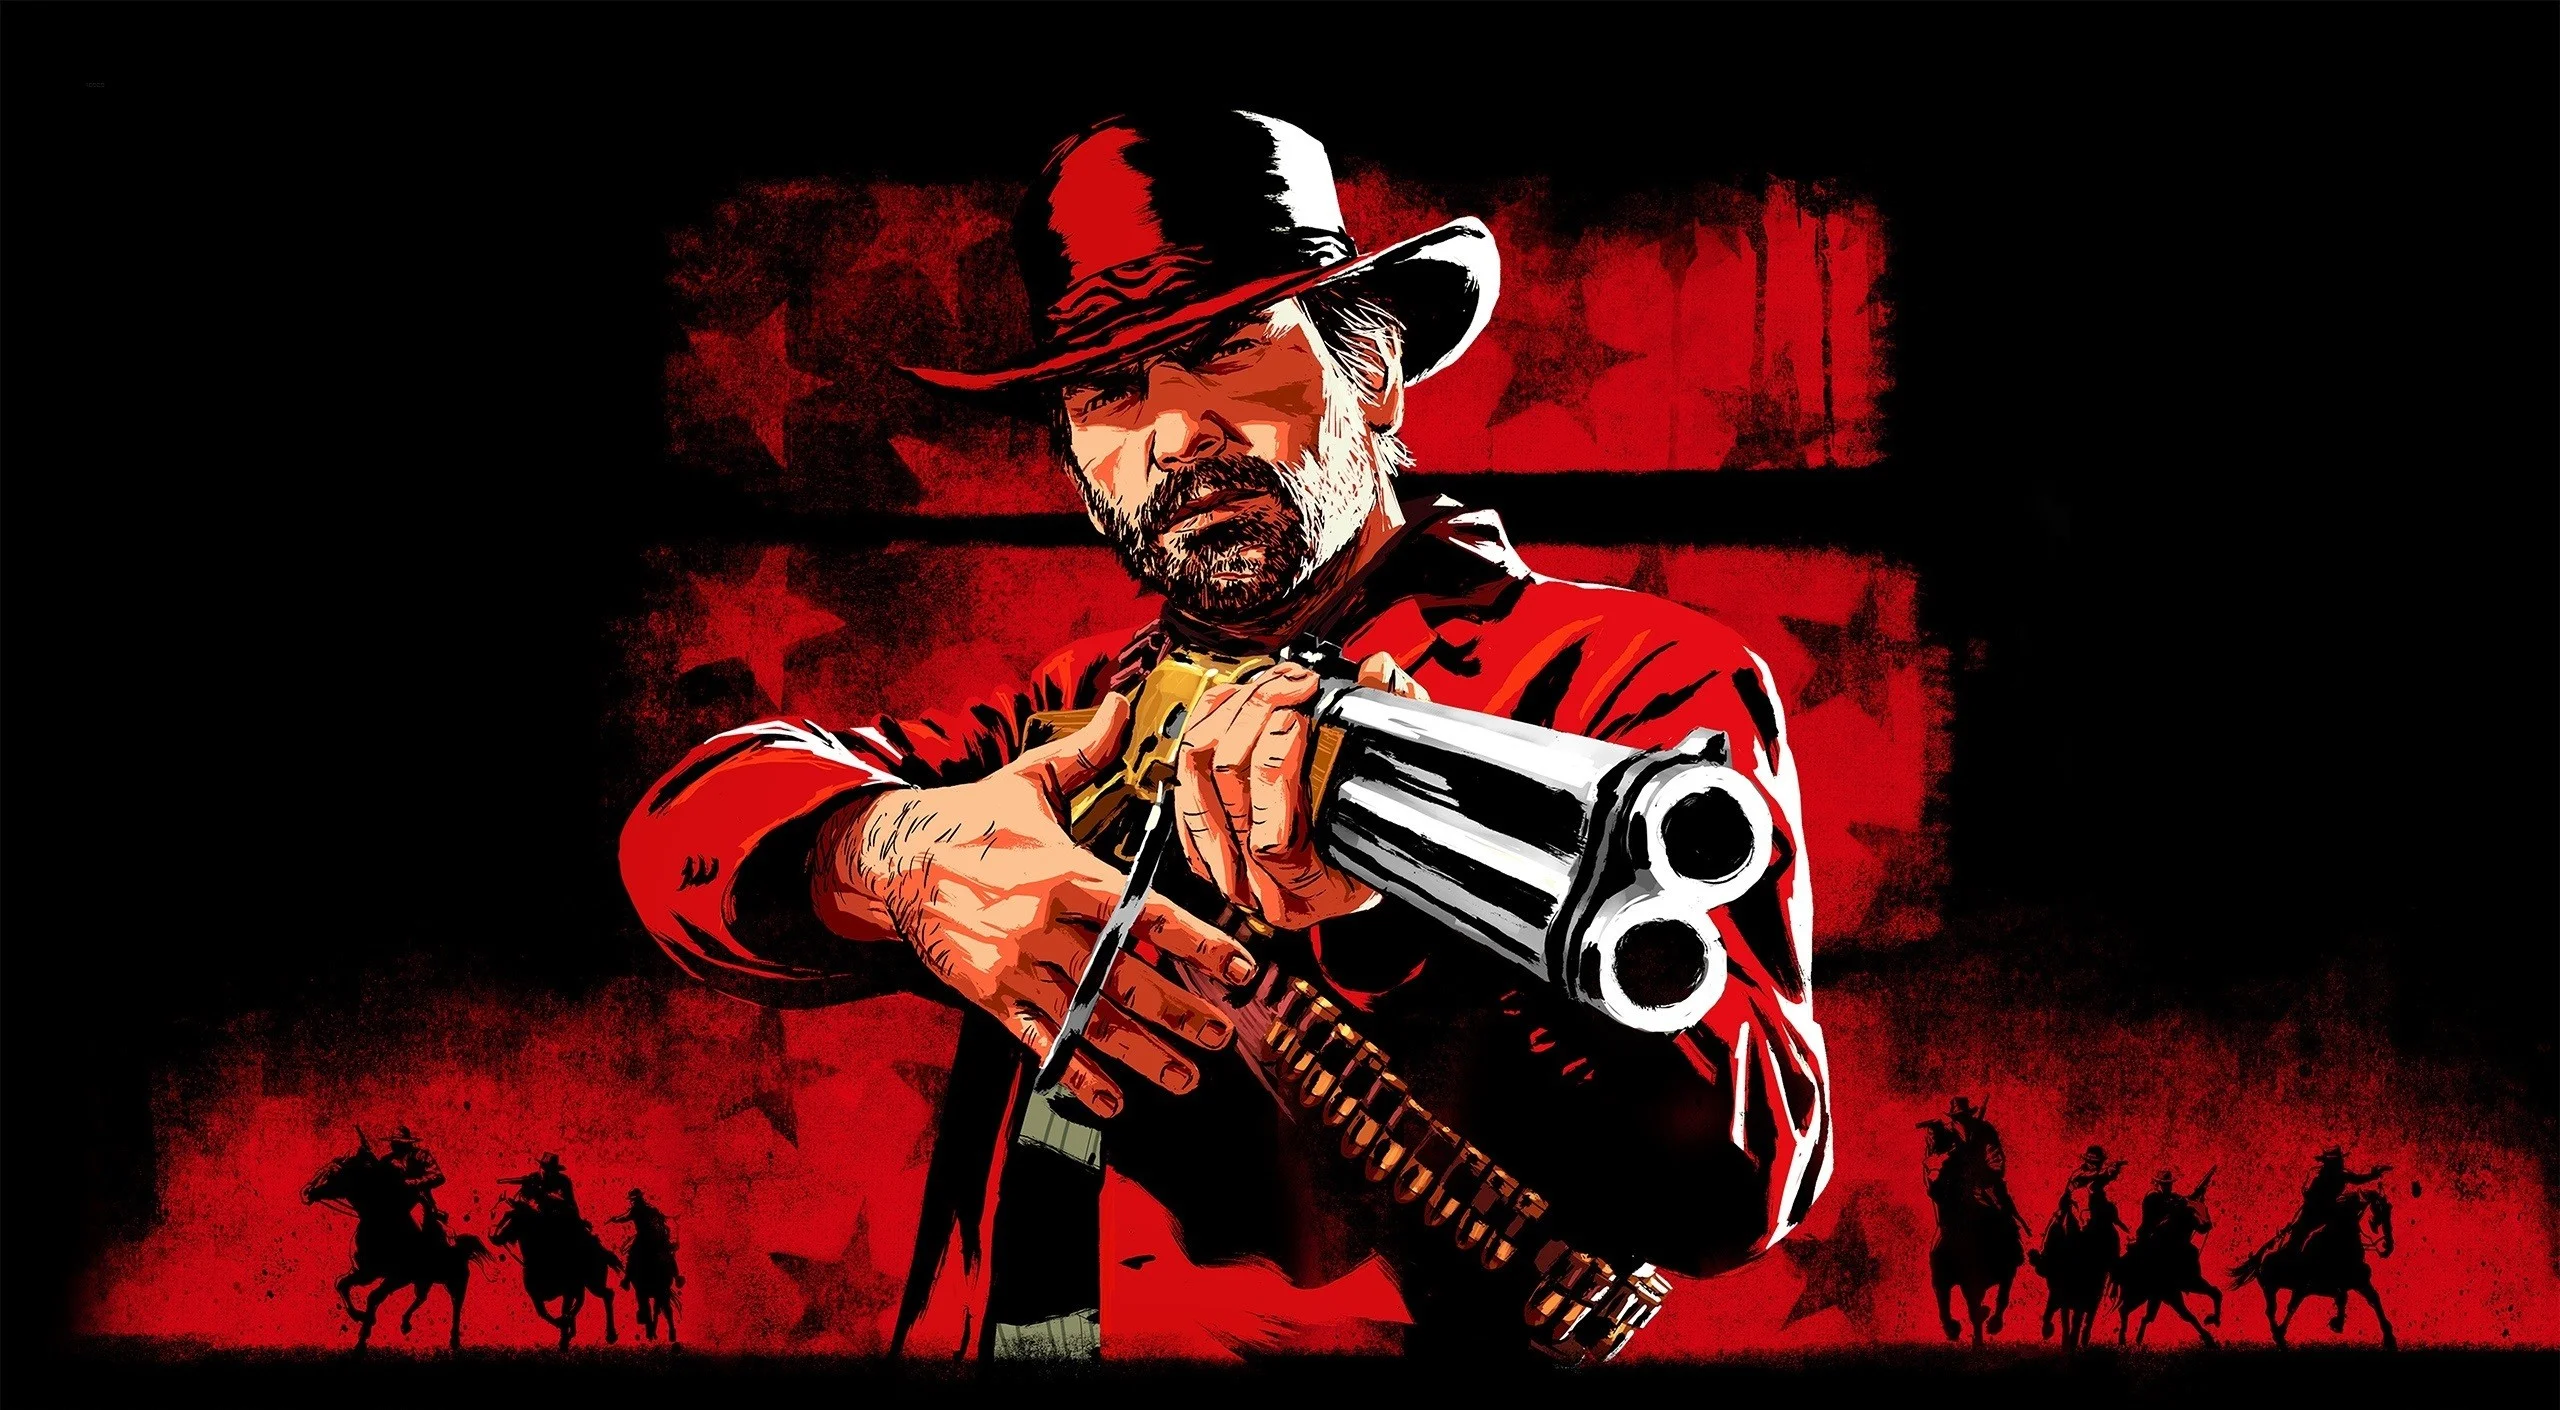 The latest version of Red Dead Redemption 2 has been hacked after all